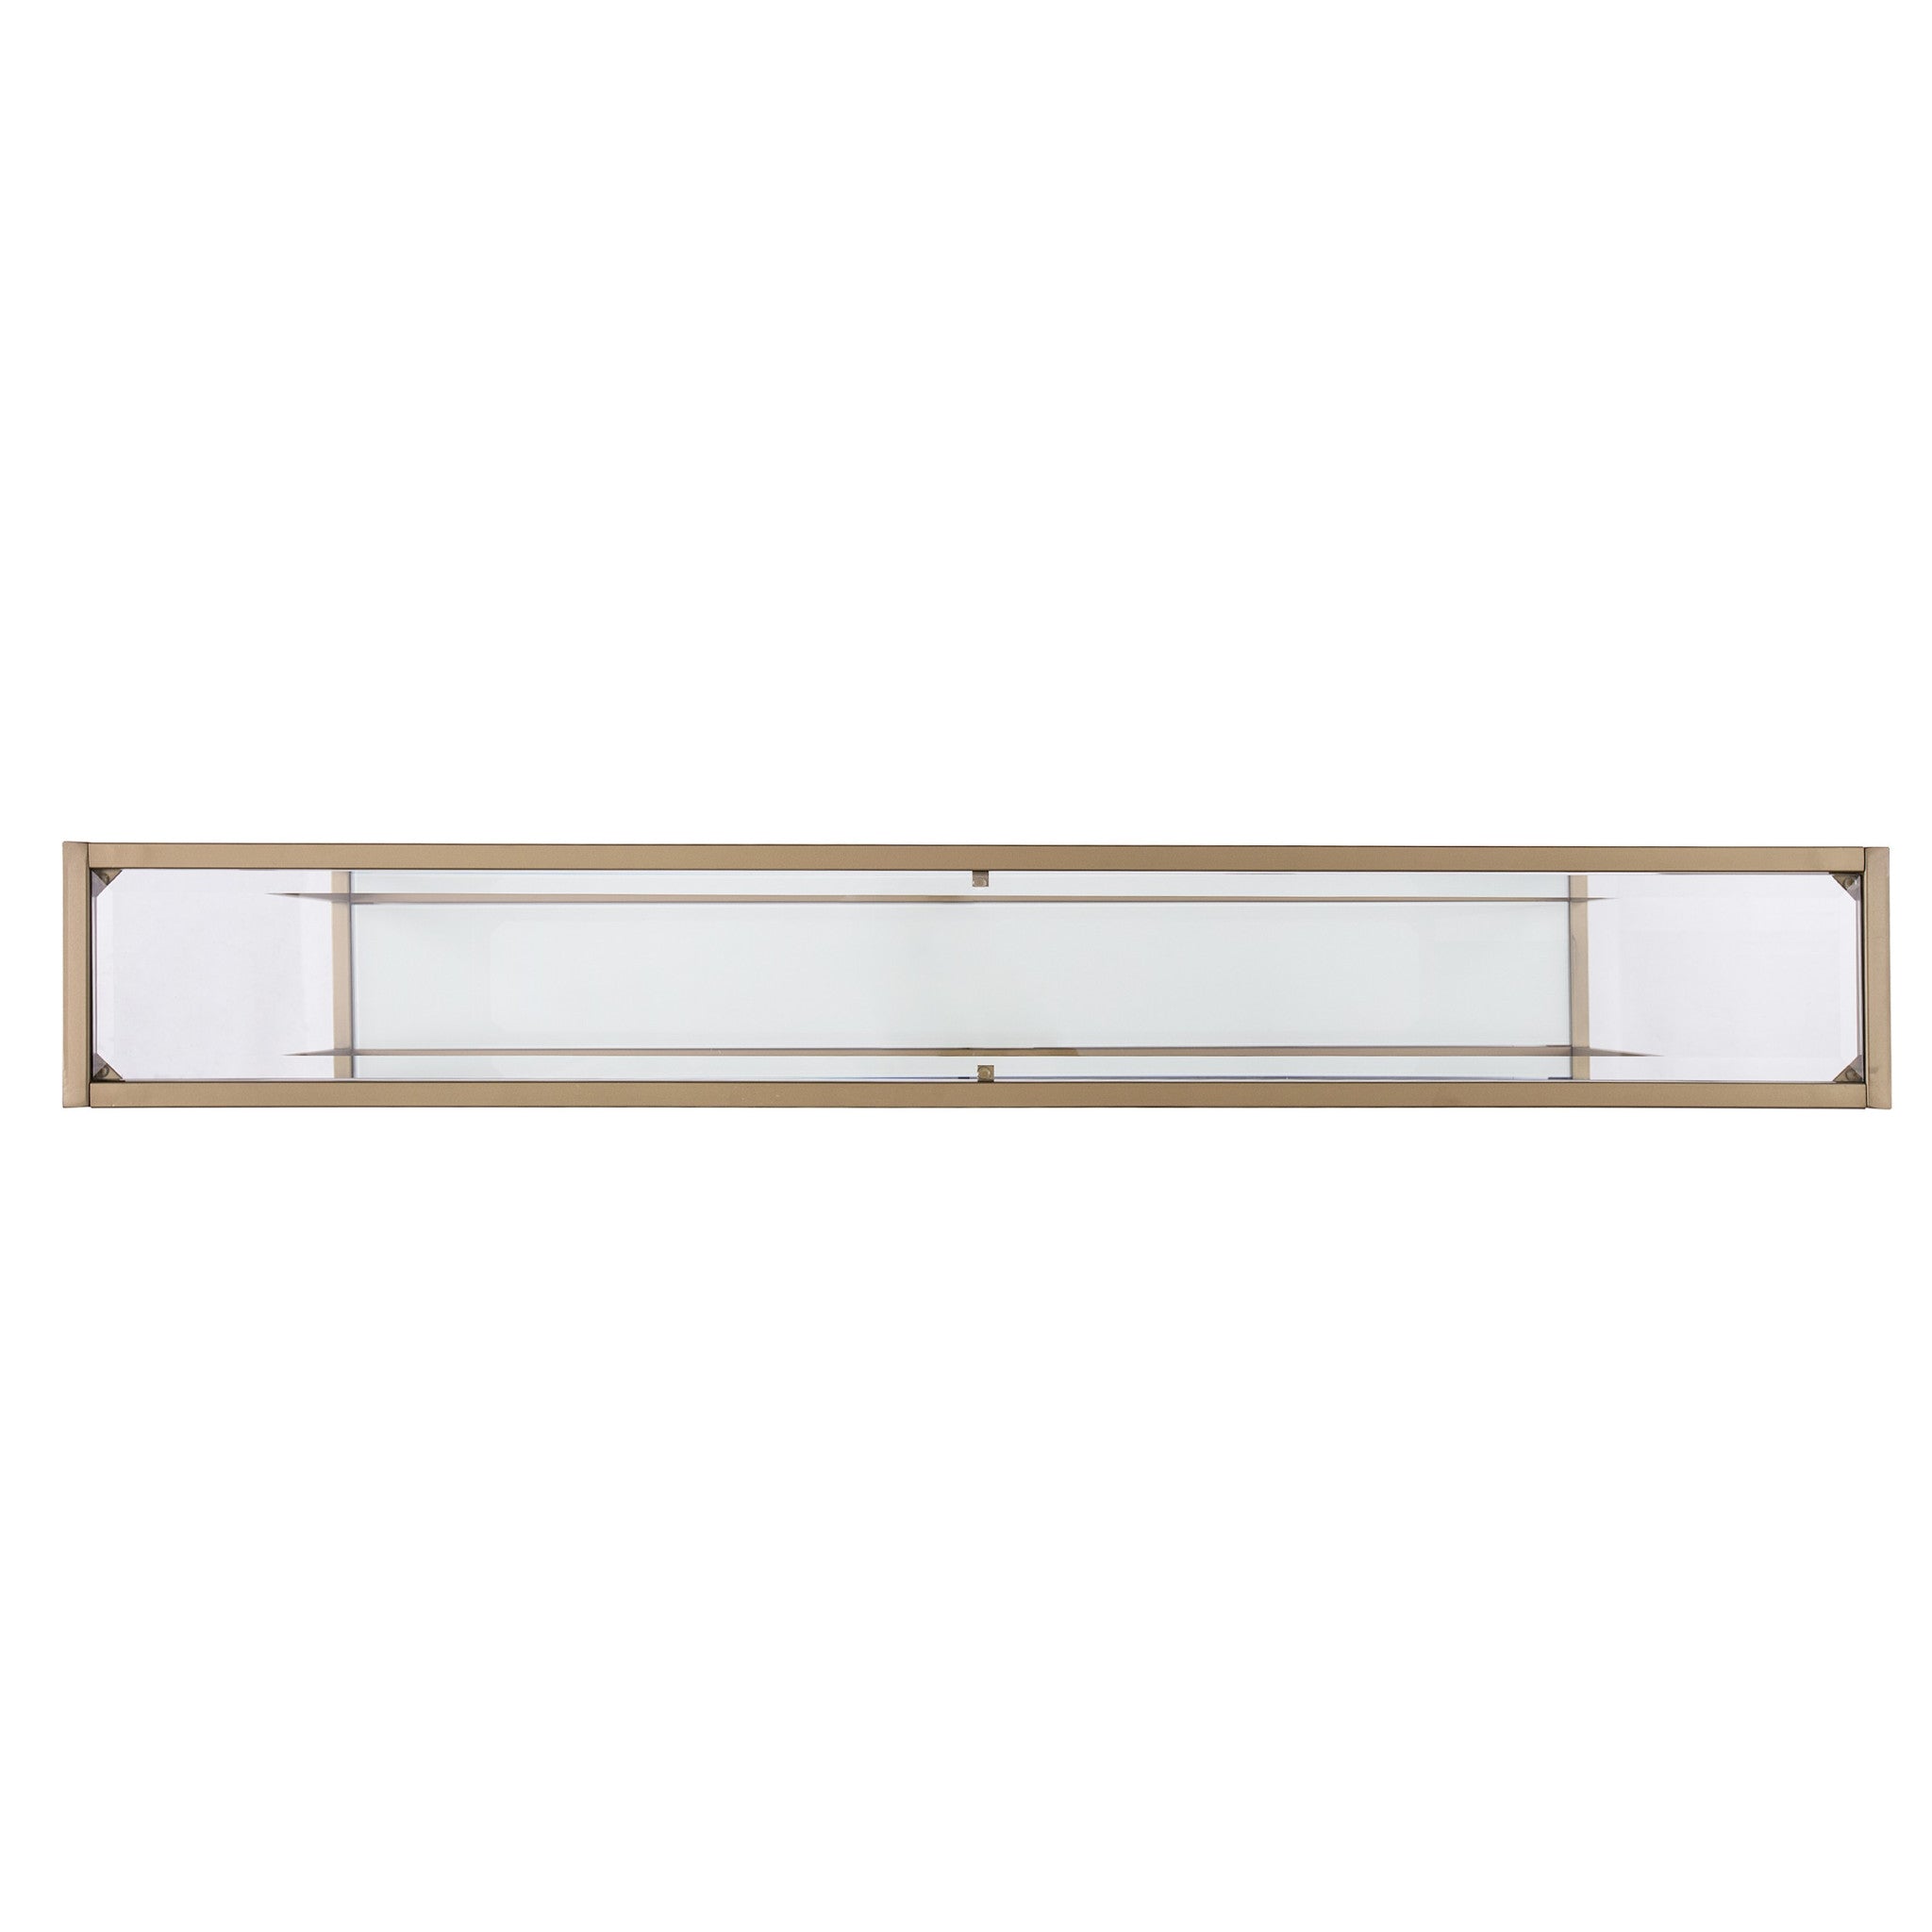 56" Clear and Gold Glass Floor Shelf Console Table With Storage